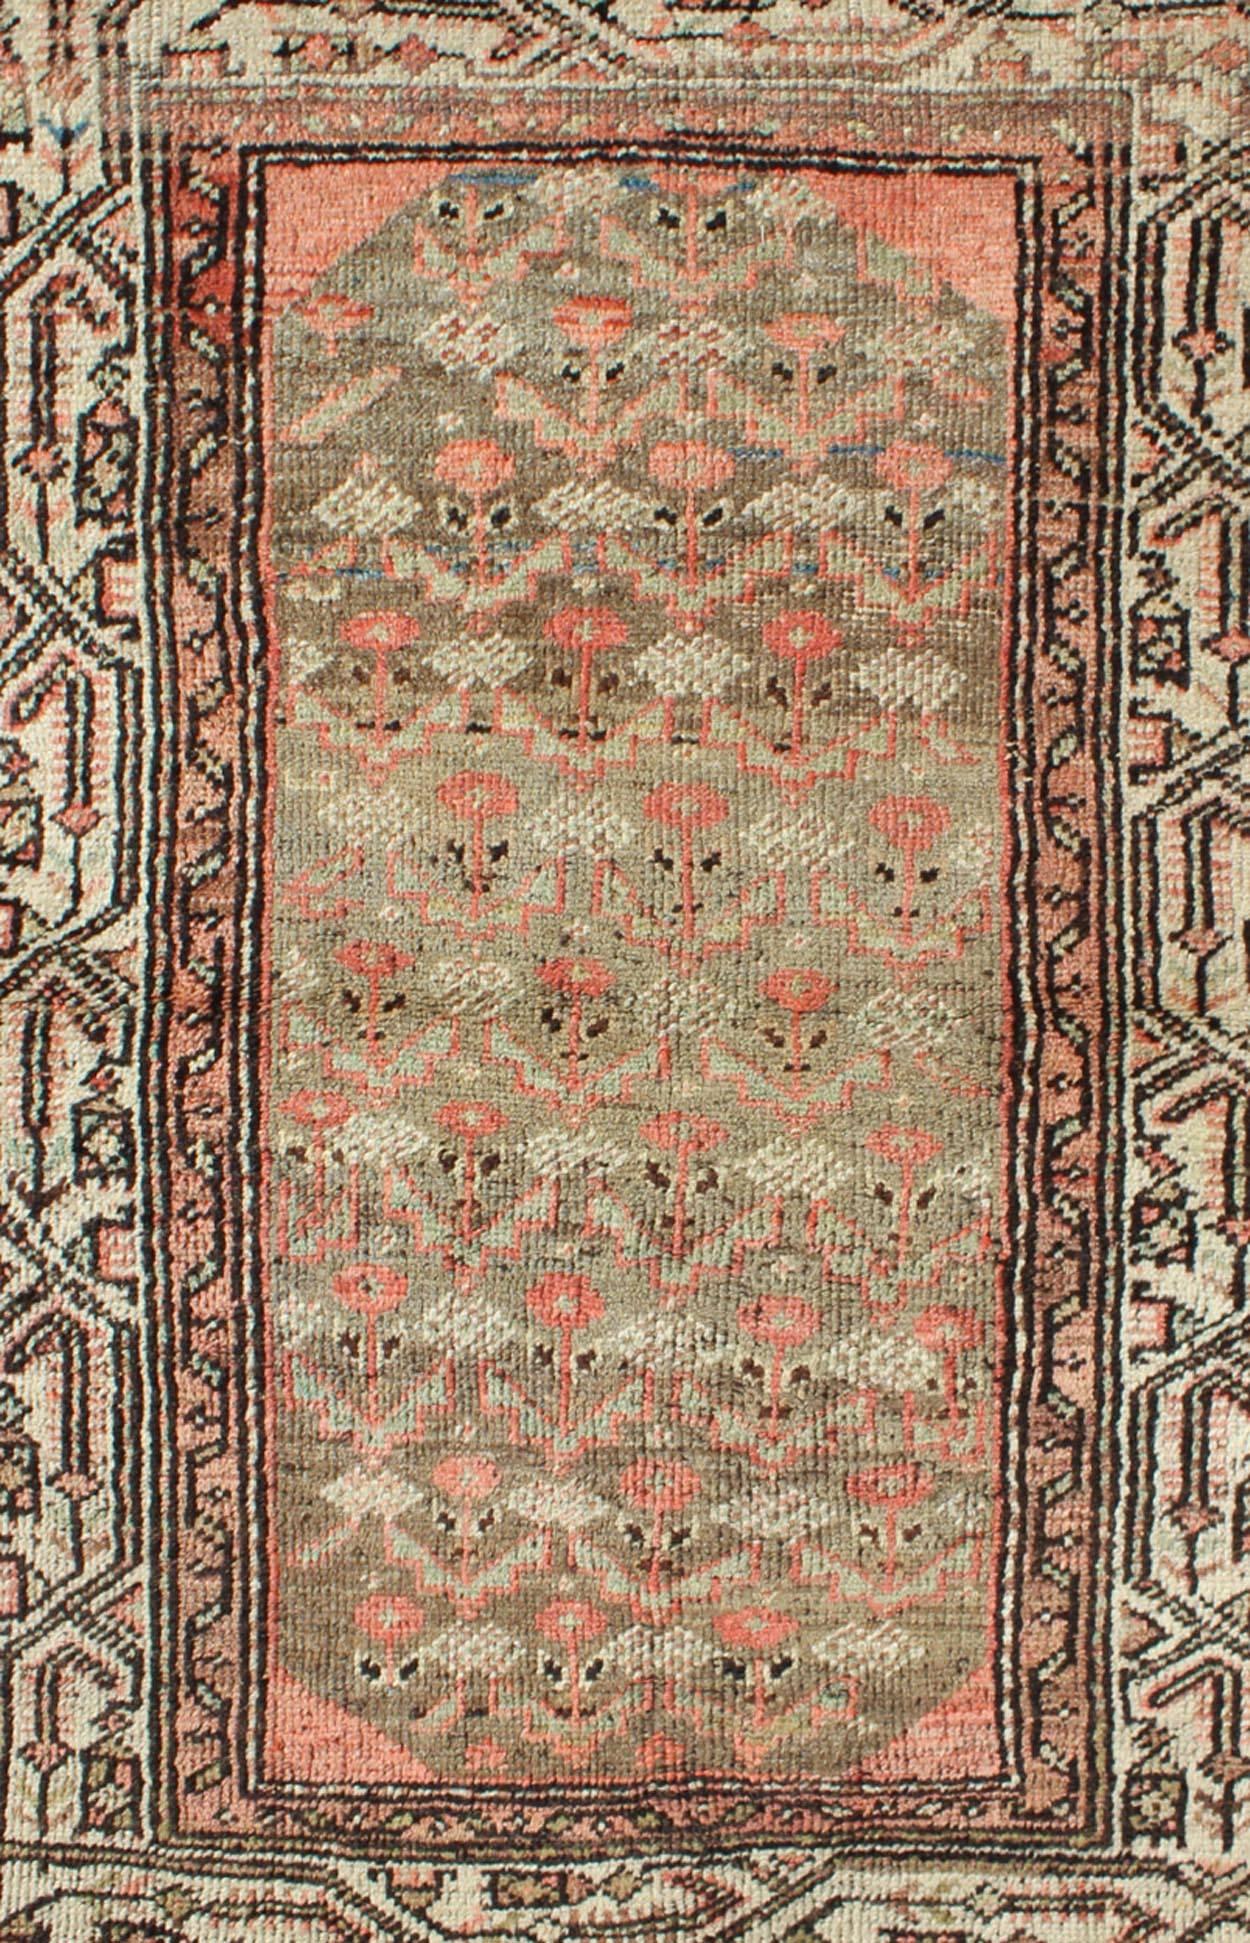 Hand-Knotted Antique Persian Hamadan Carpet with Tribal Designs in Taupe, Ivory and Orange